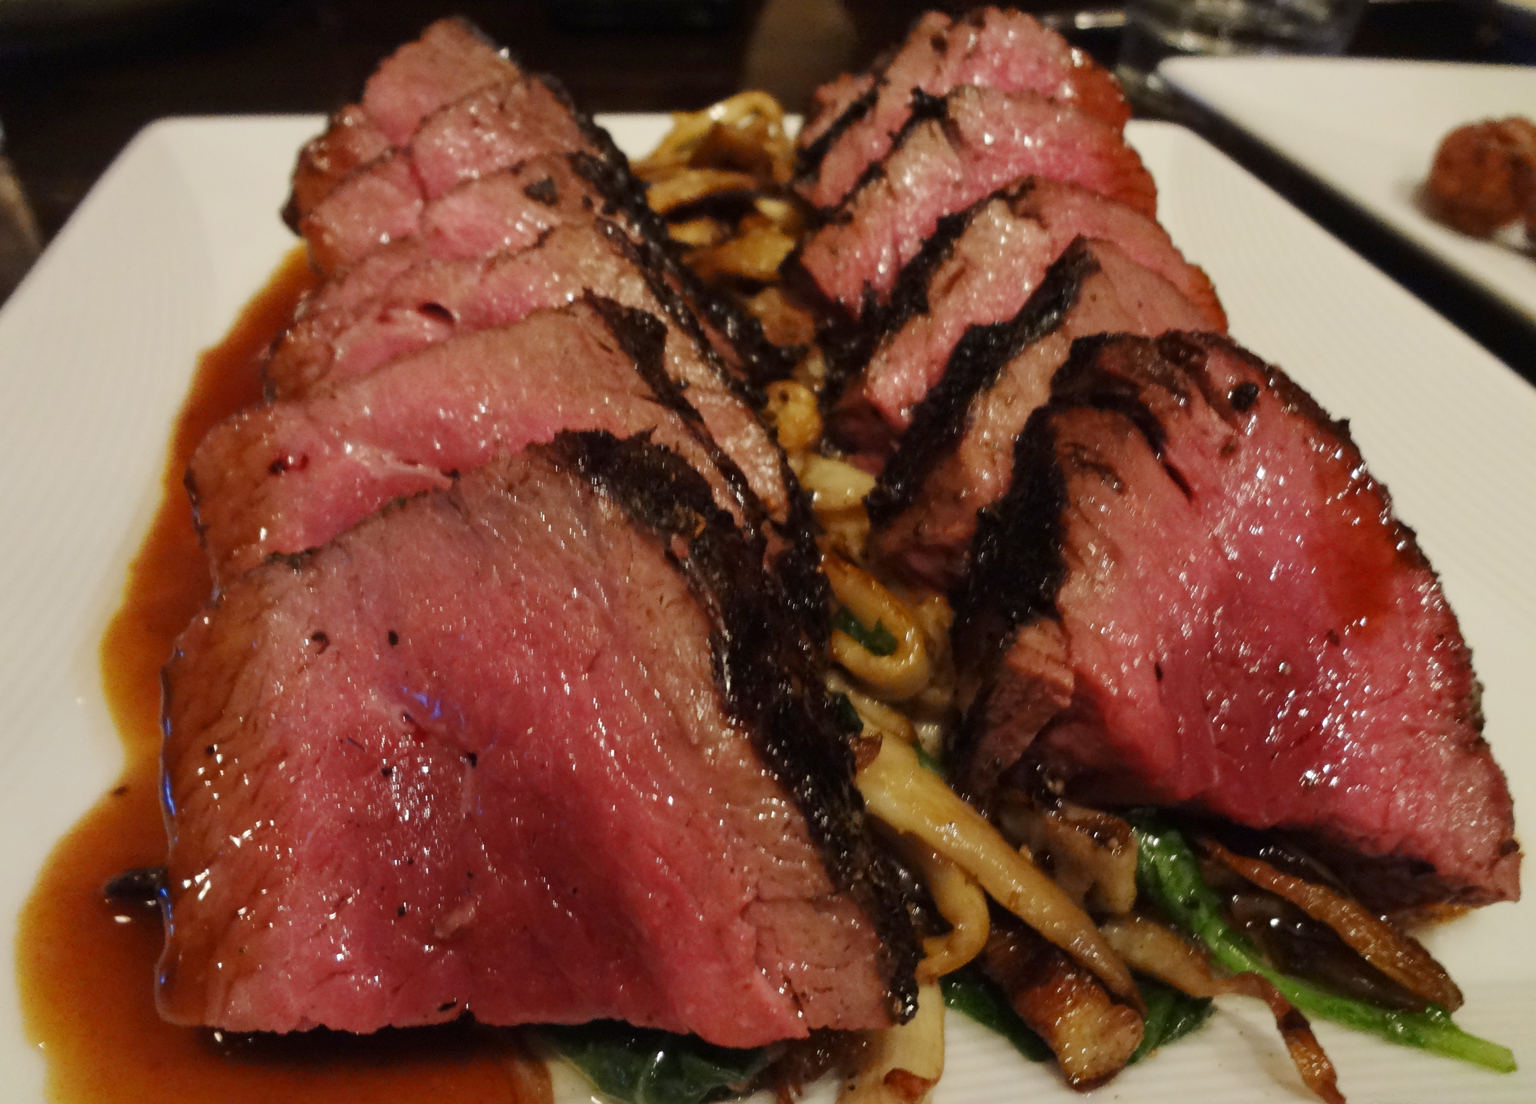 Rare ostrich fan filet on a bed of pan roasted mushrooms